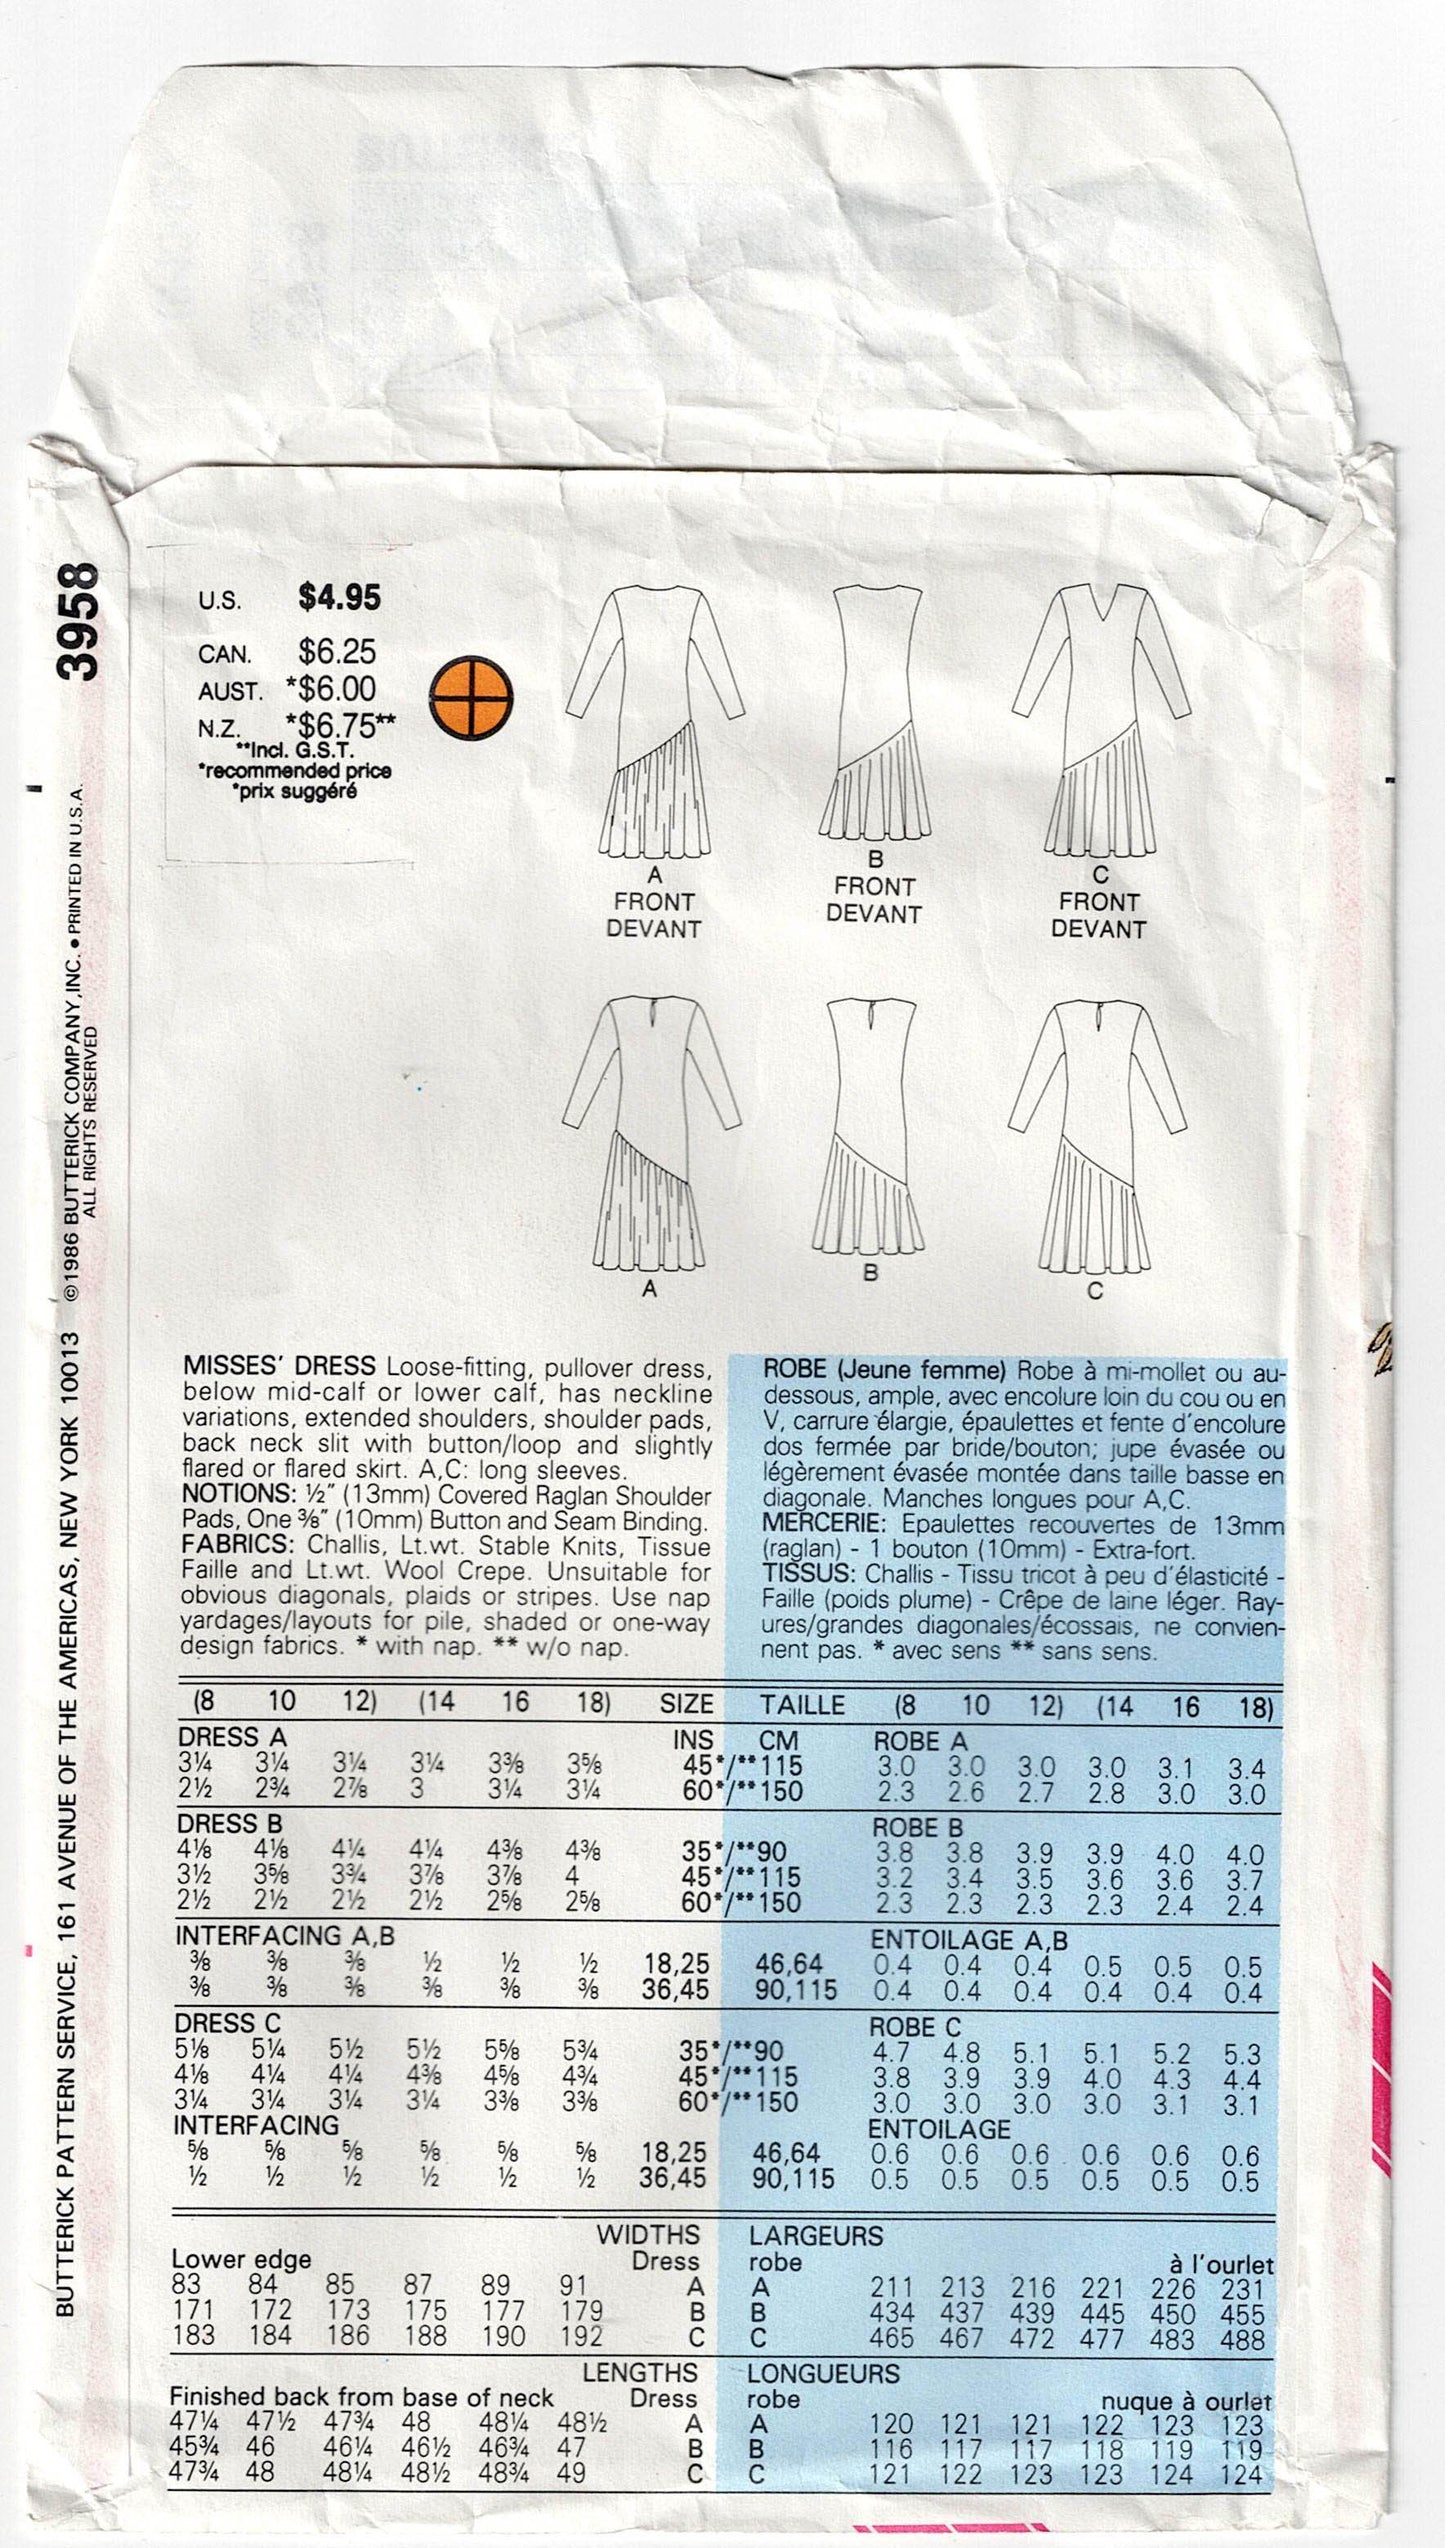 Butterick 3958 Womens EASY Dress with Asymmetric Flounce 1980s Vintage Sewing Pattern Size 8 - 12